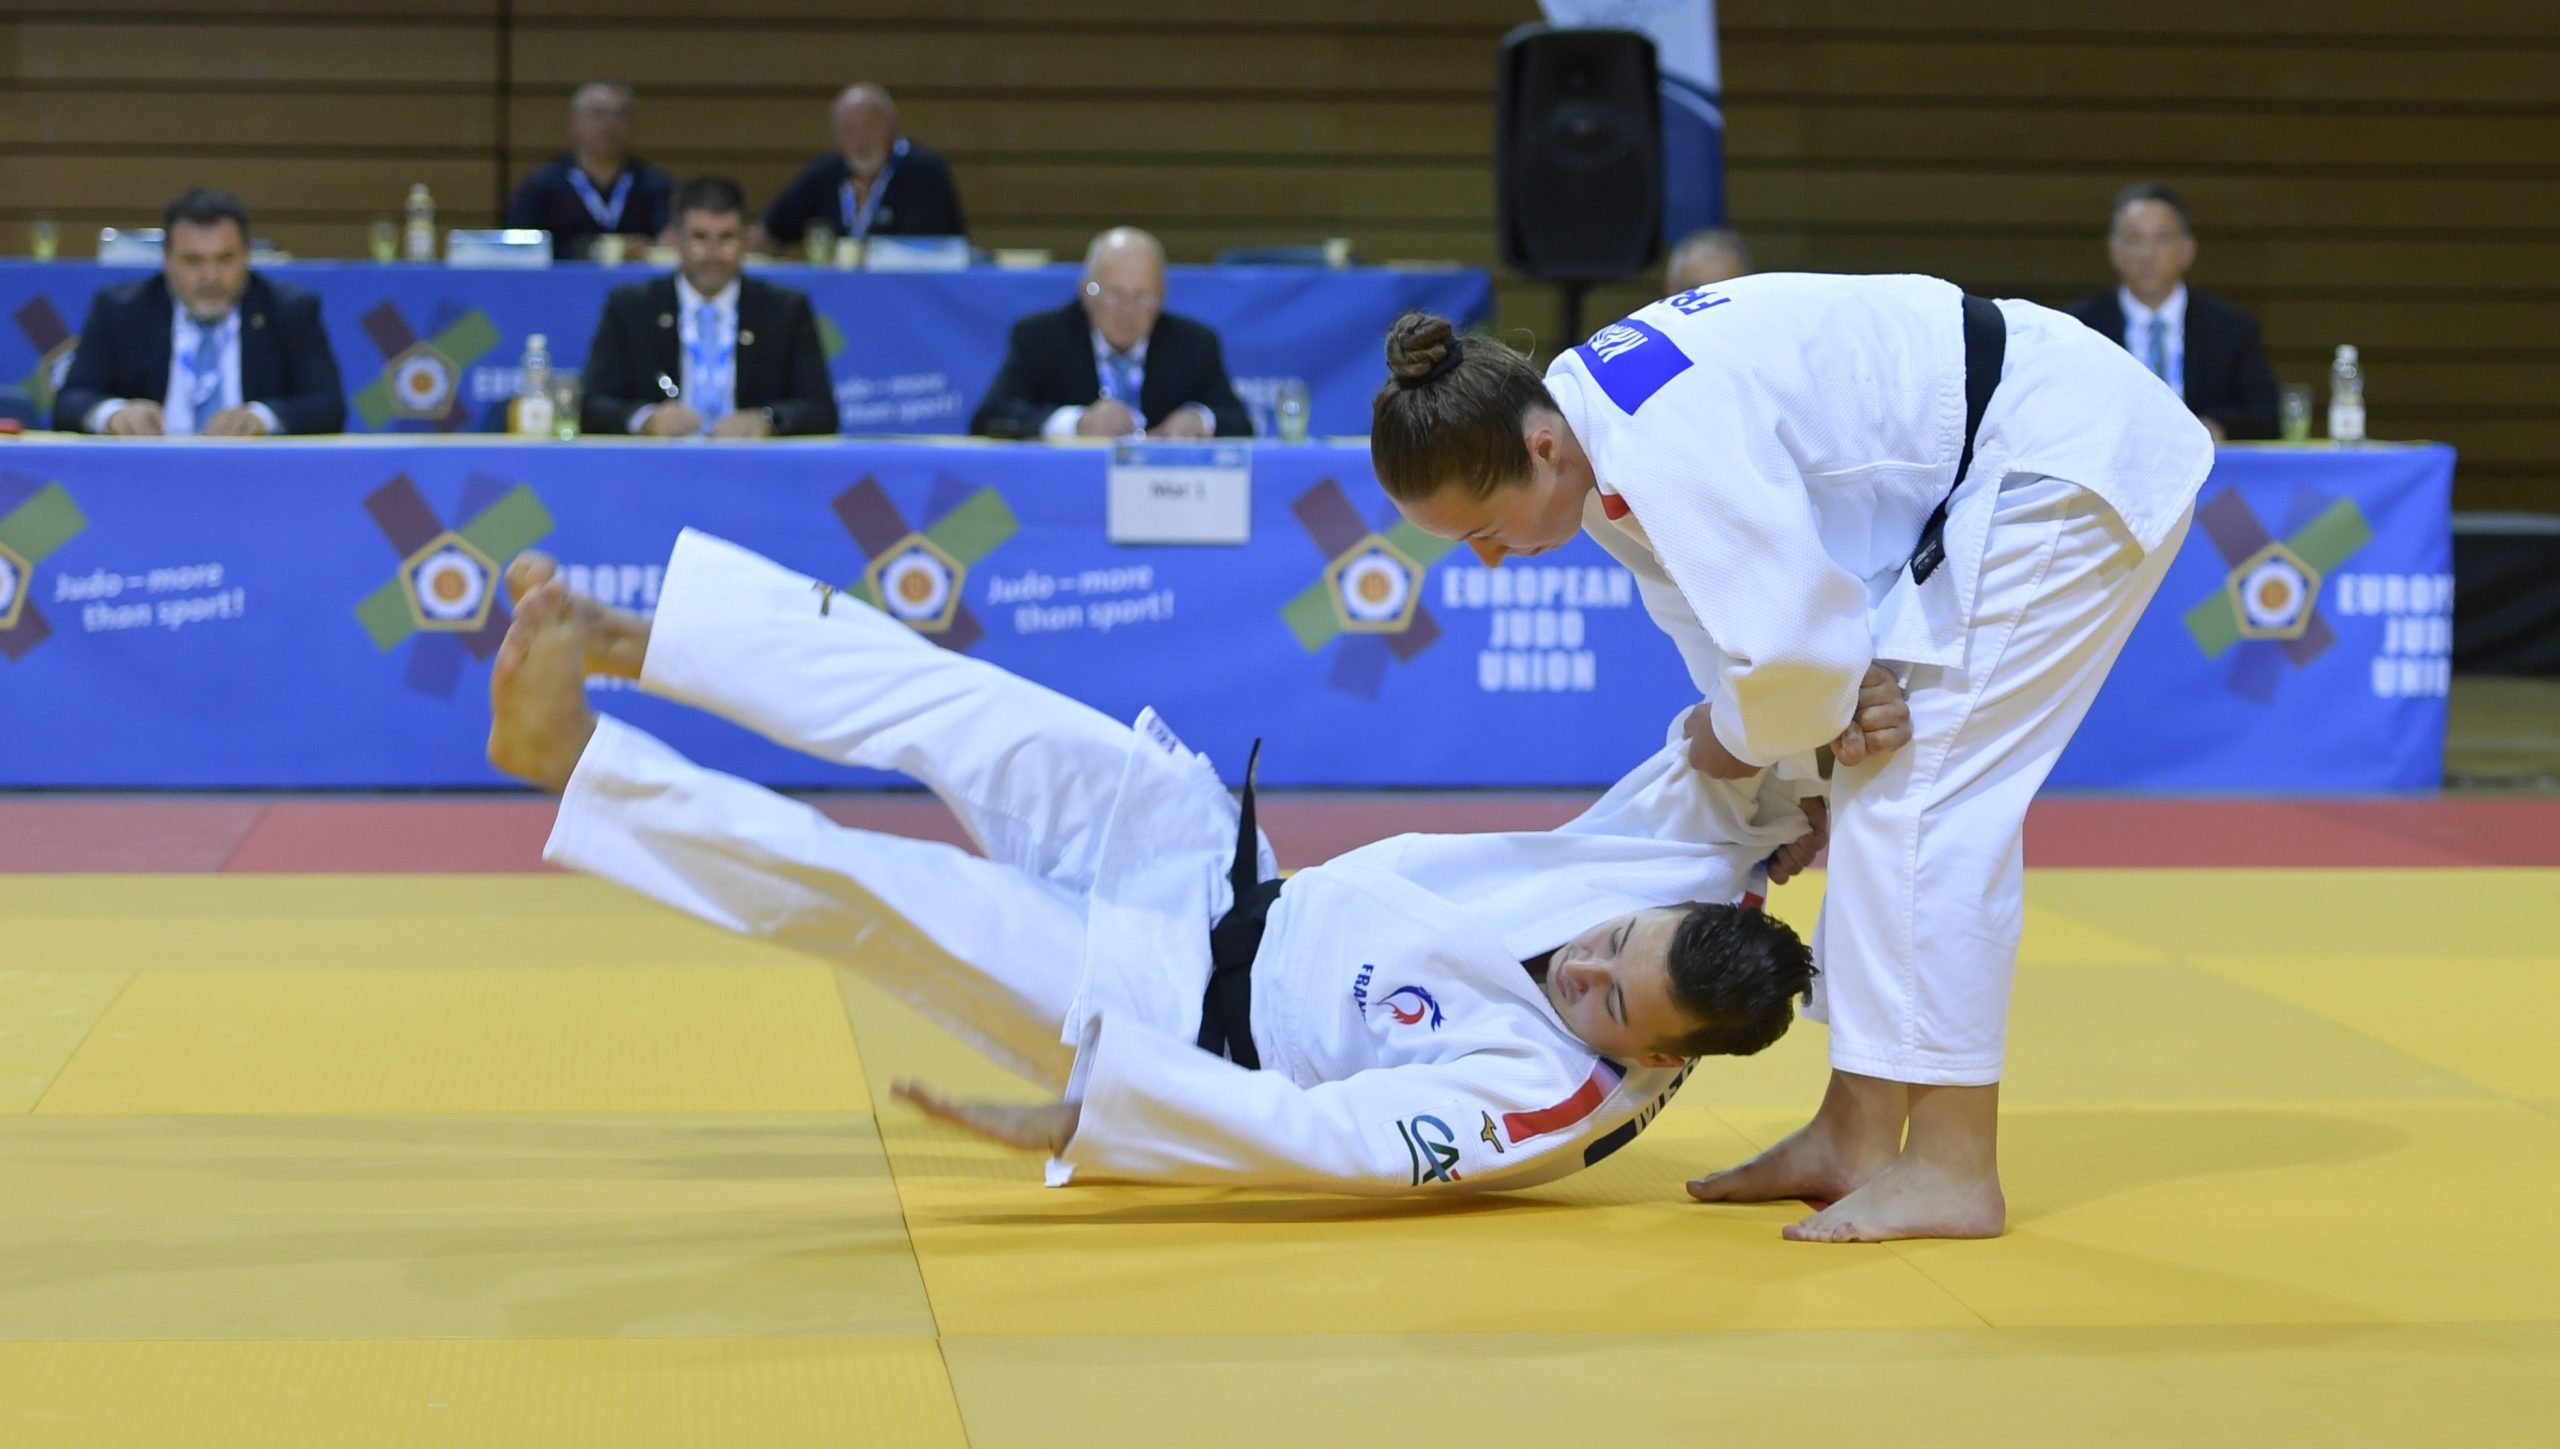 THE KATA EUROPEAN CHAMPIONSHIPS LOOKS TO THE NEW GENERATION